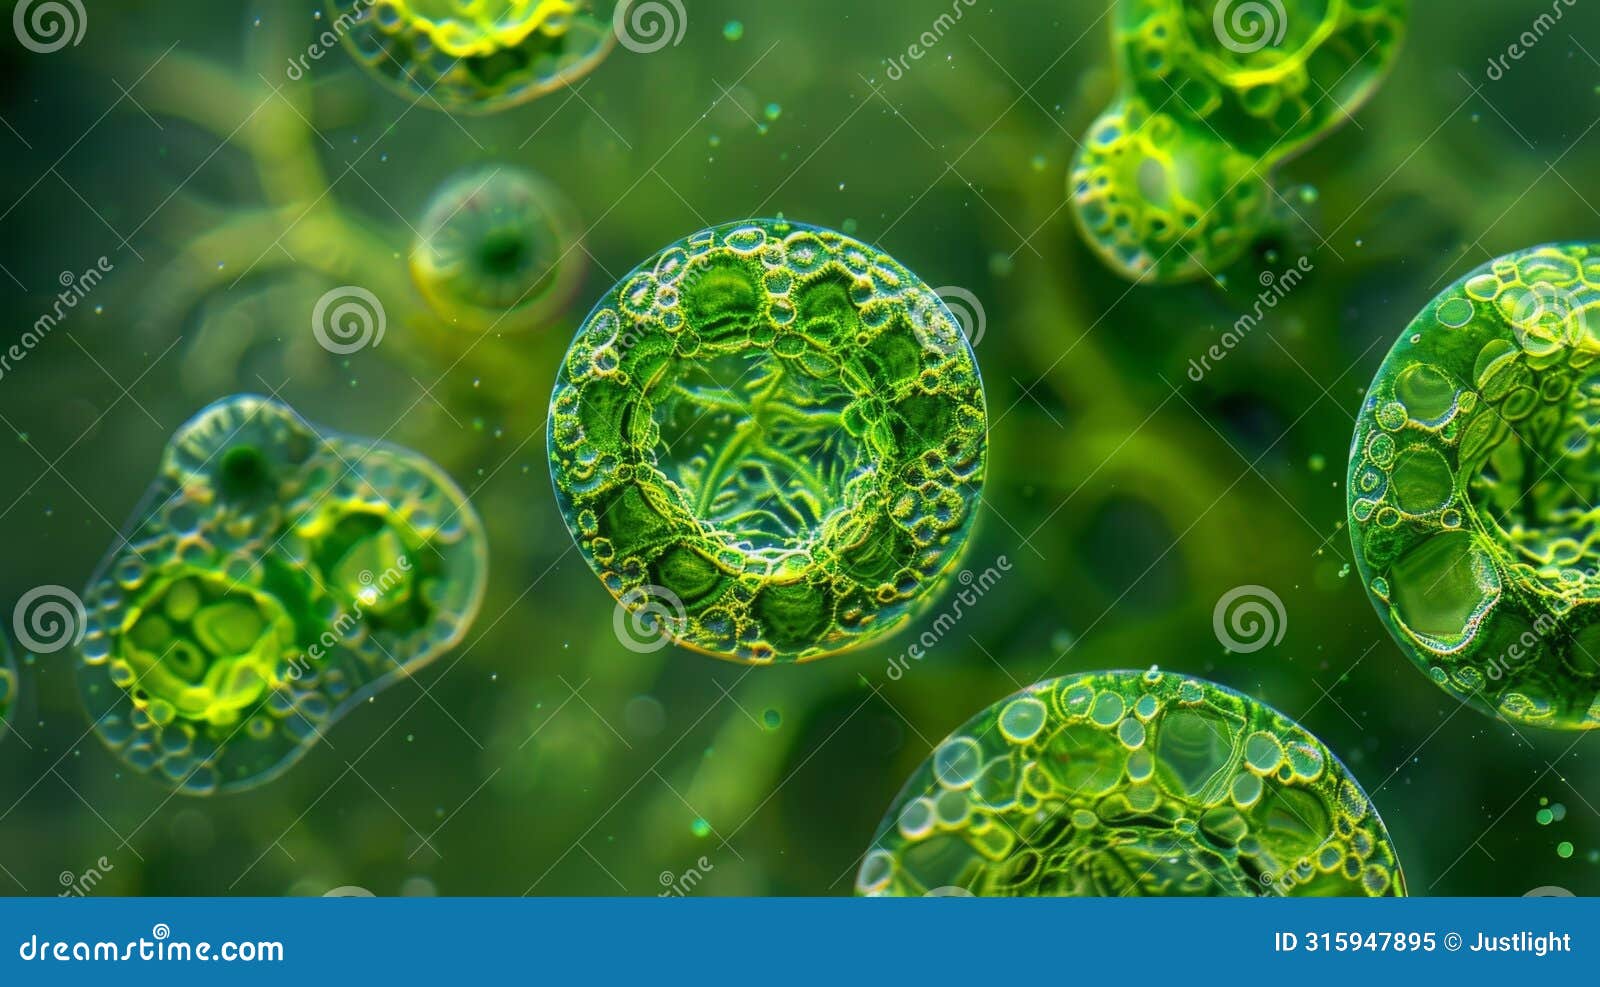 a microscopic image of green algae cells each with a distinct nucleus and chloroplasts that give them their vibrant